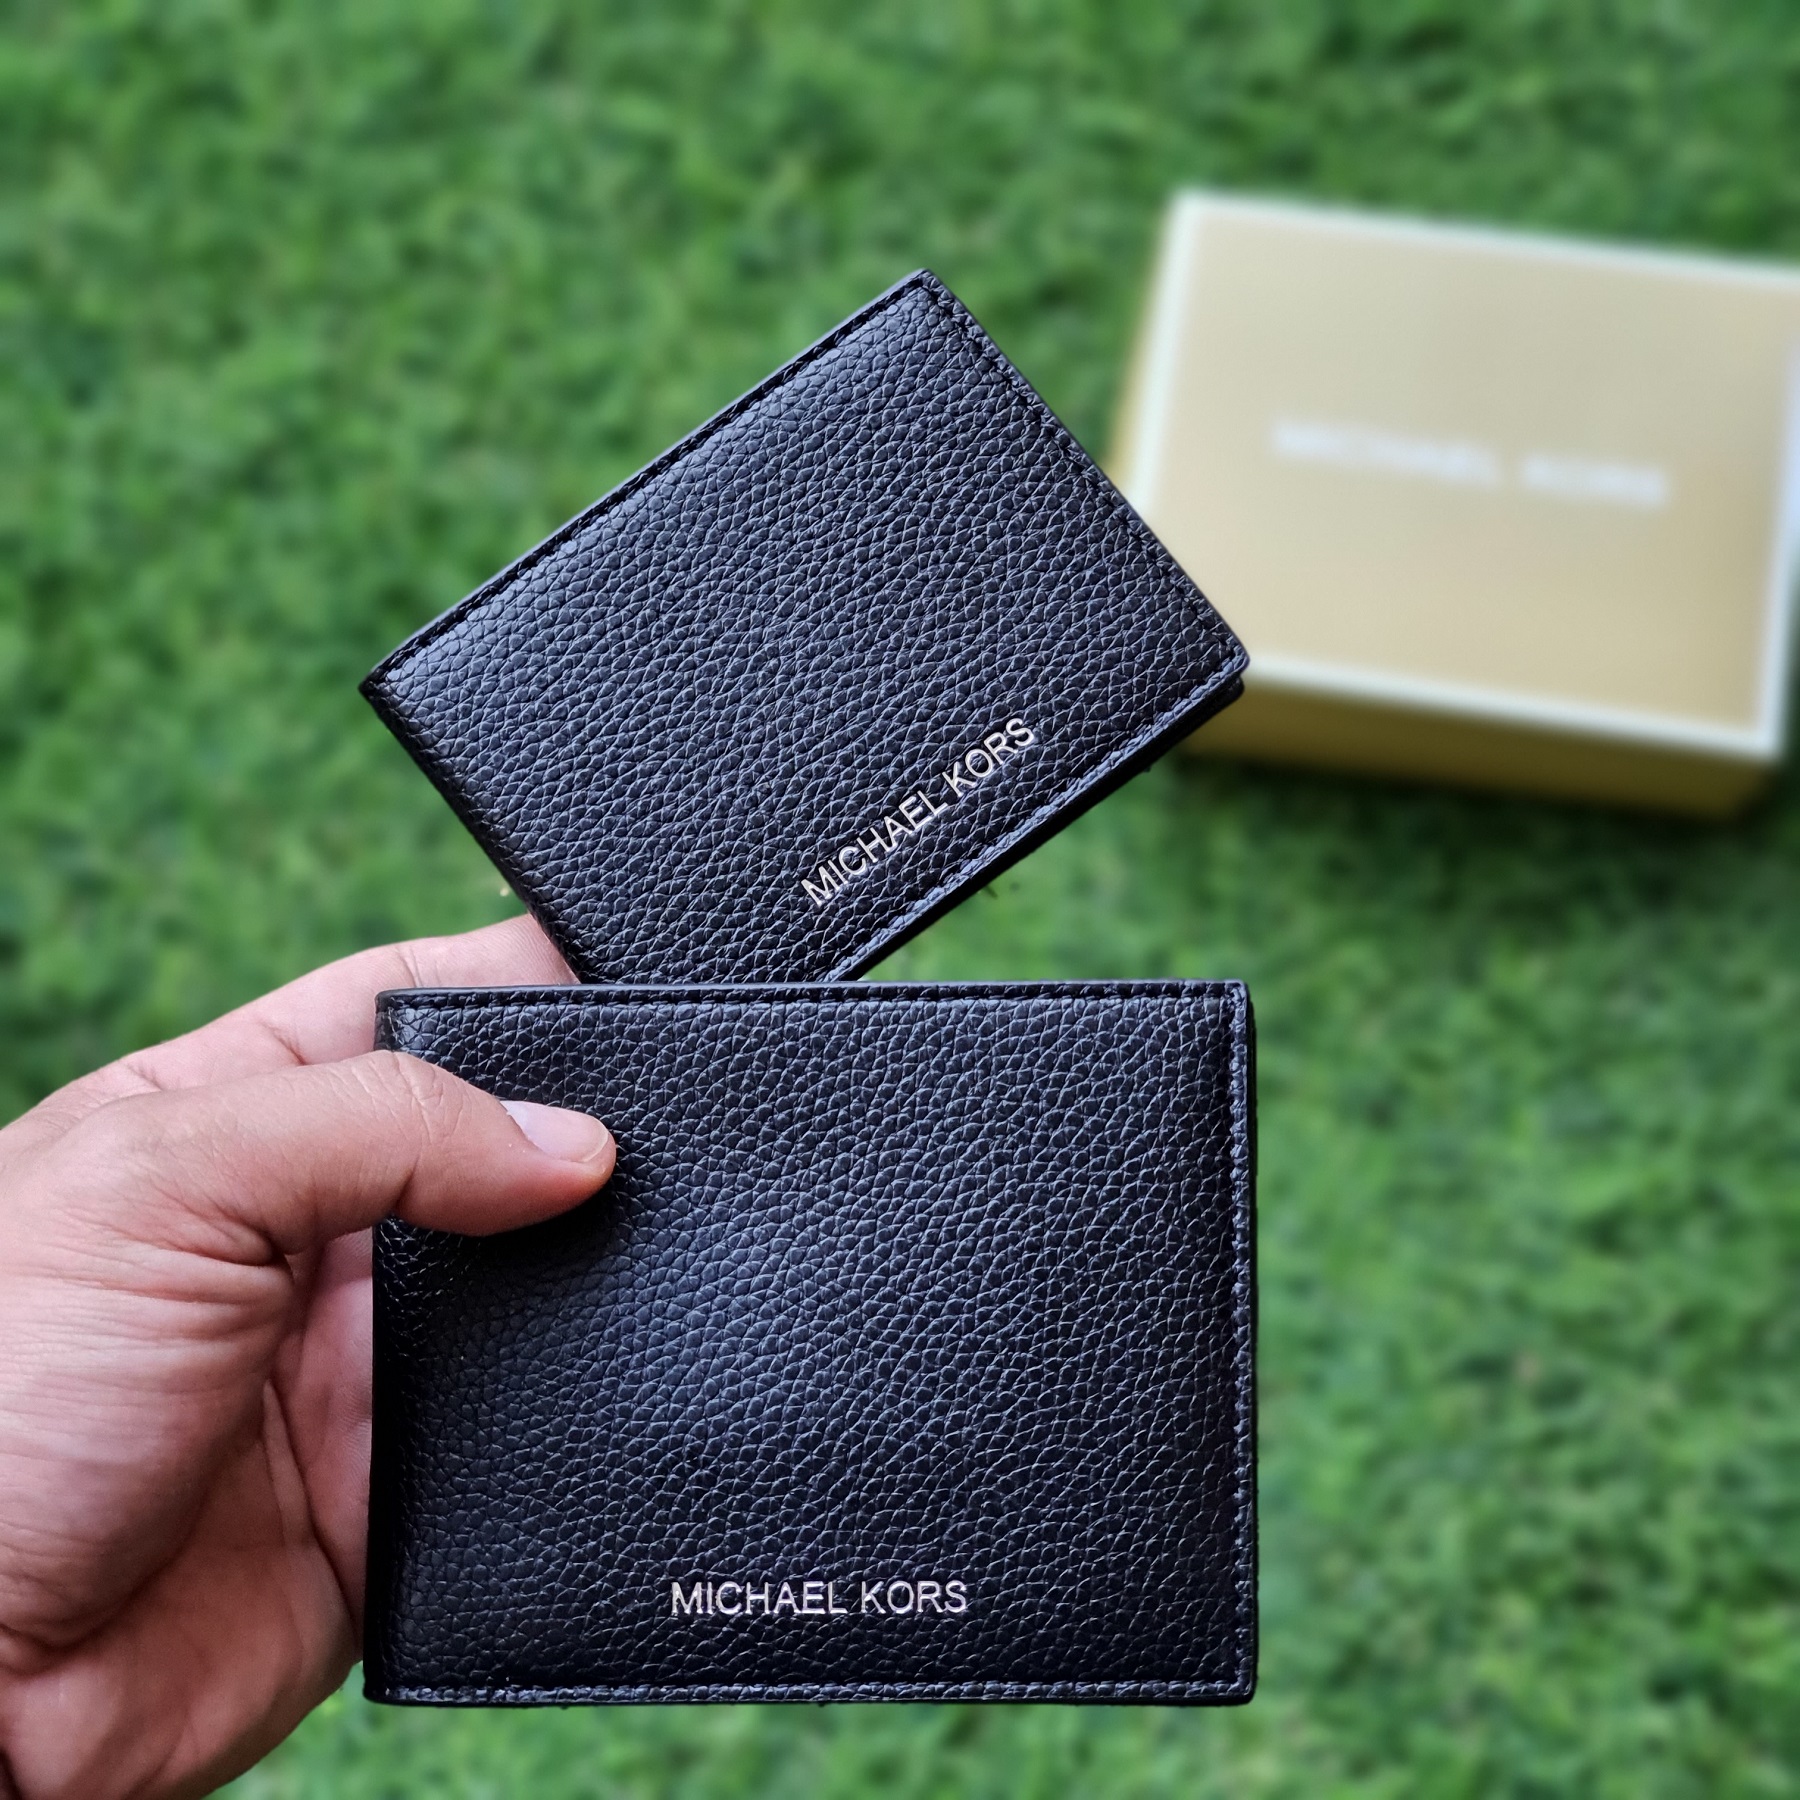 Guaranteed Authentic Michael Kors Black Pebble Leather Men's Billfold Wallet  With Card Case | Lazada PH